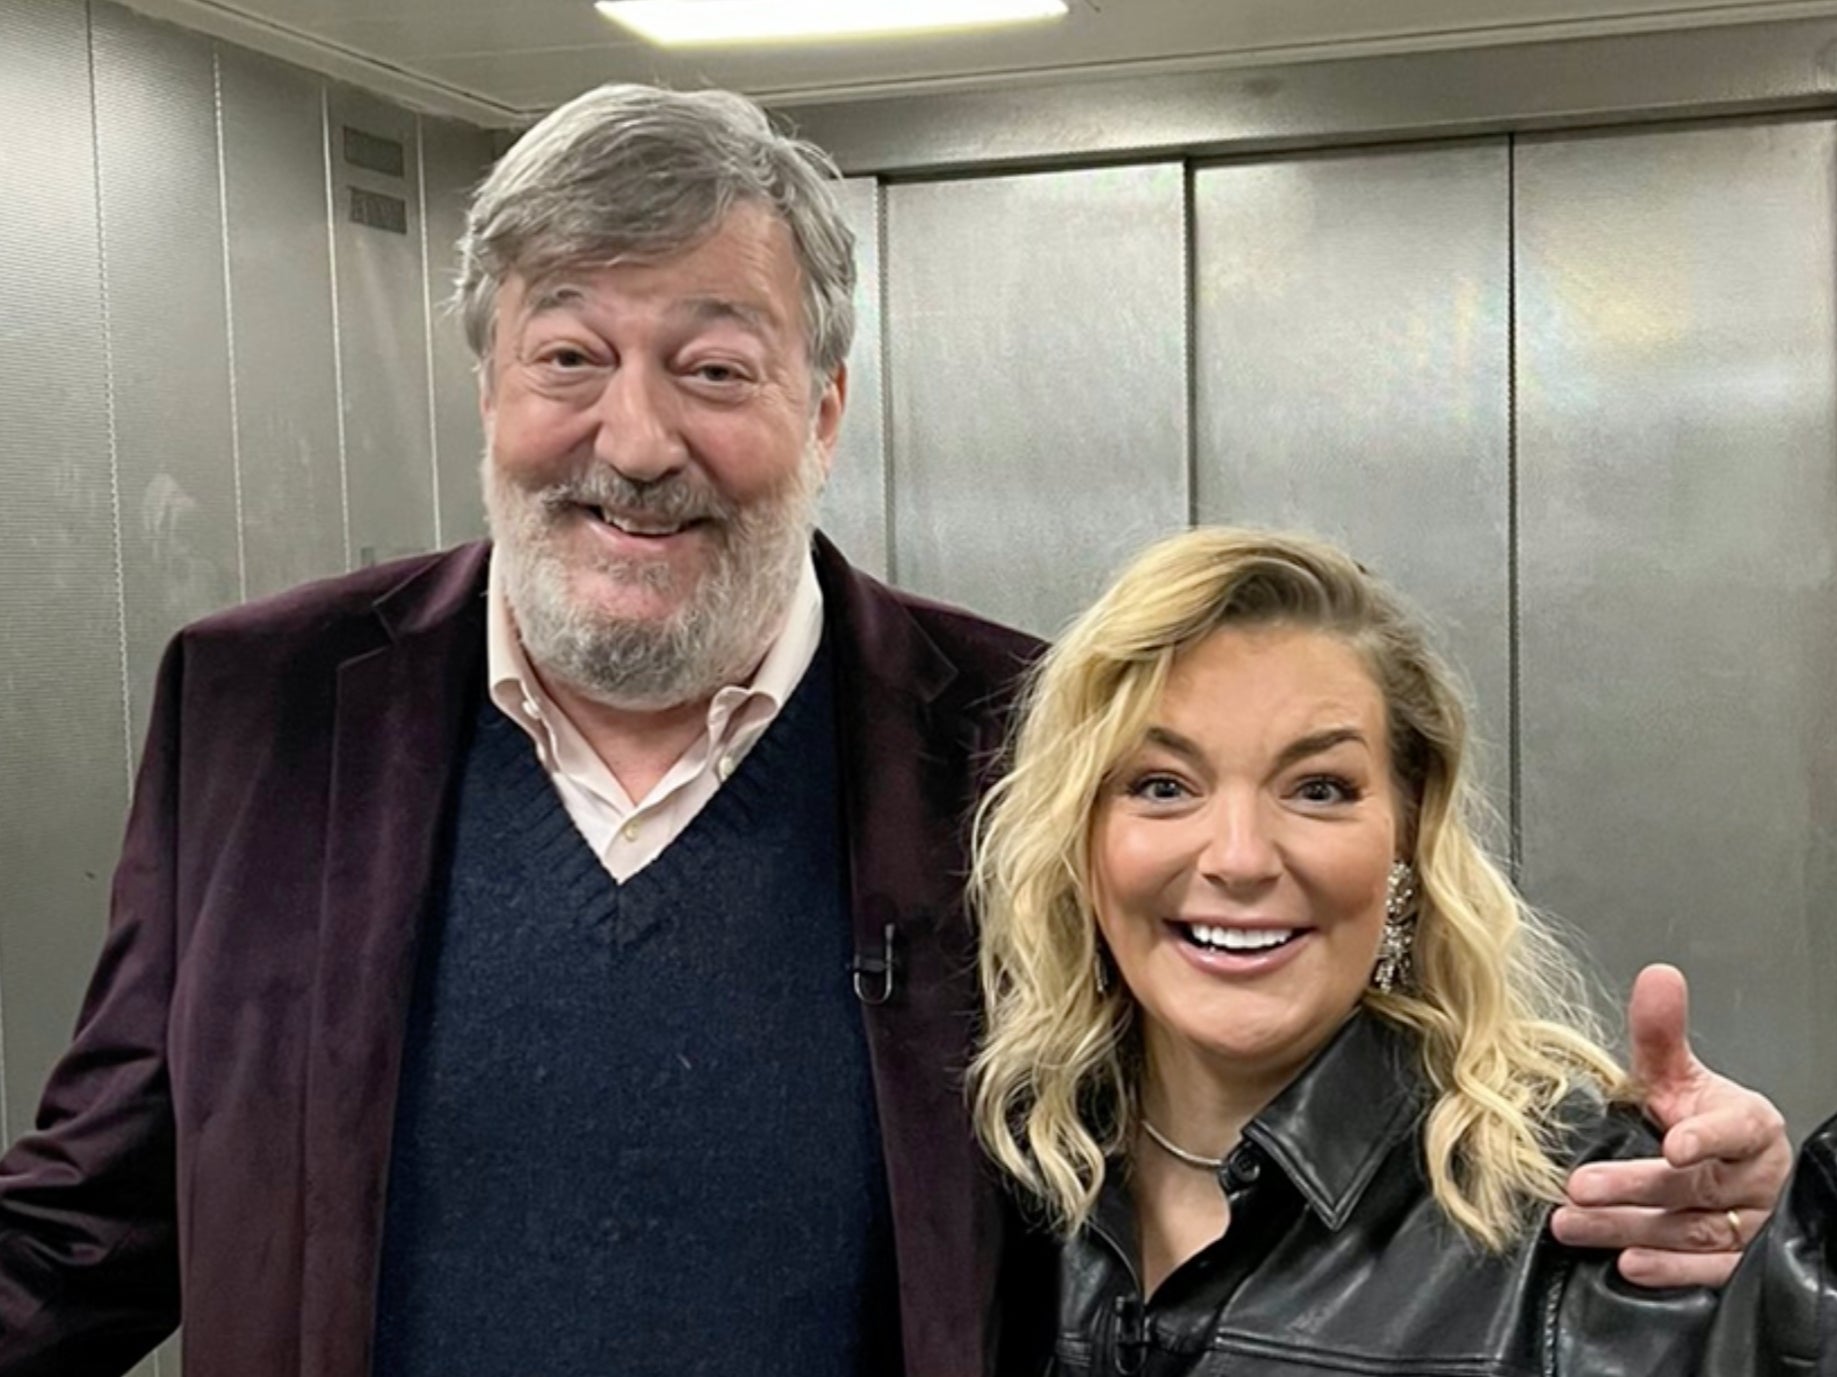 Sheridan Smith and Stephen Fry shared a selfie after getting stuck in a lift